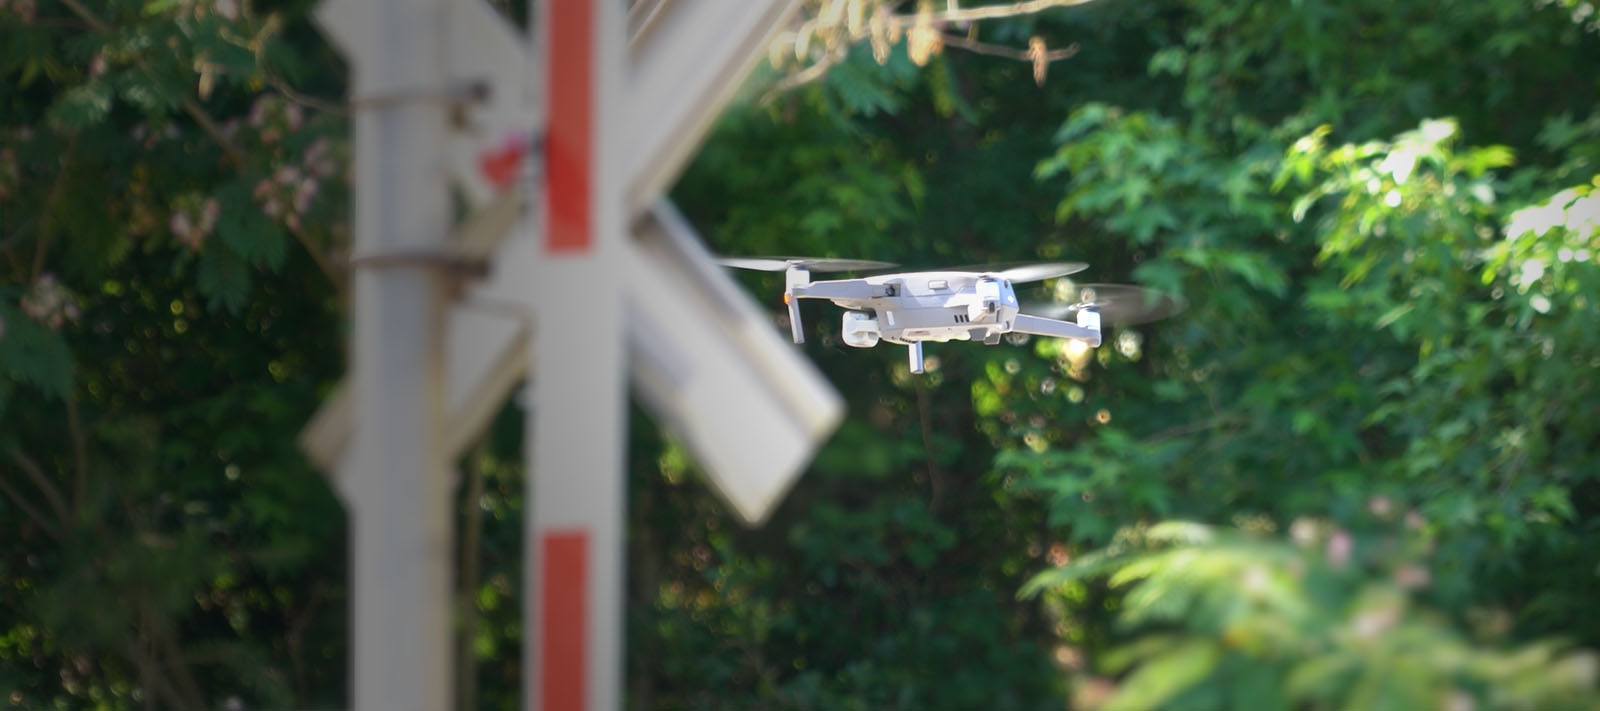 Photo of a drone hovering near a railroad crossbuck and gate, with a forest in the background.